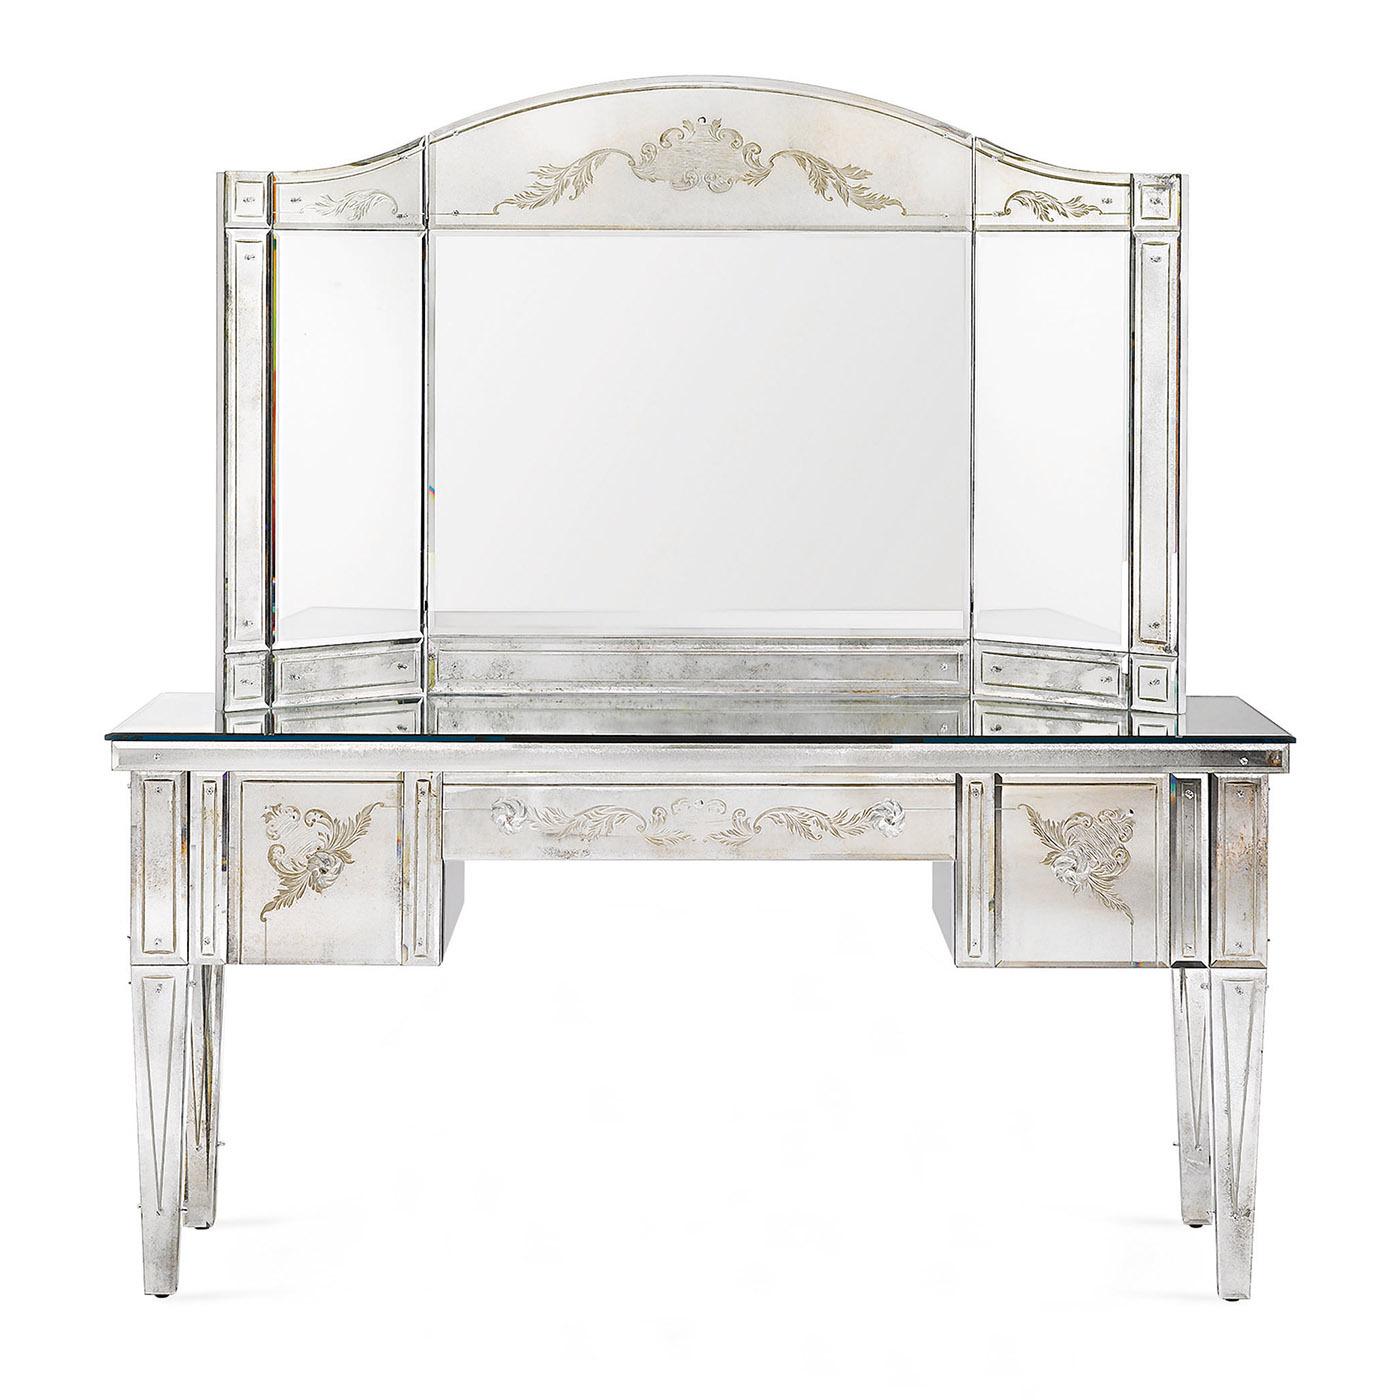 This French-style make-up desk belongs to the Montrmarte Collection. The Art Déco style suits perfectly any design scheme for royal bedrooms. The structure is made of wood with silver leafed finish. Four tapered legs with chrome-plated metal lower